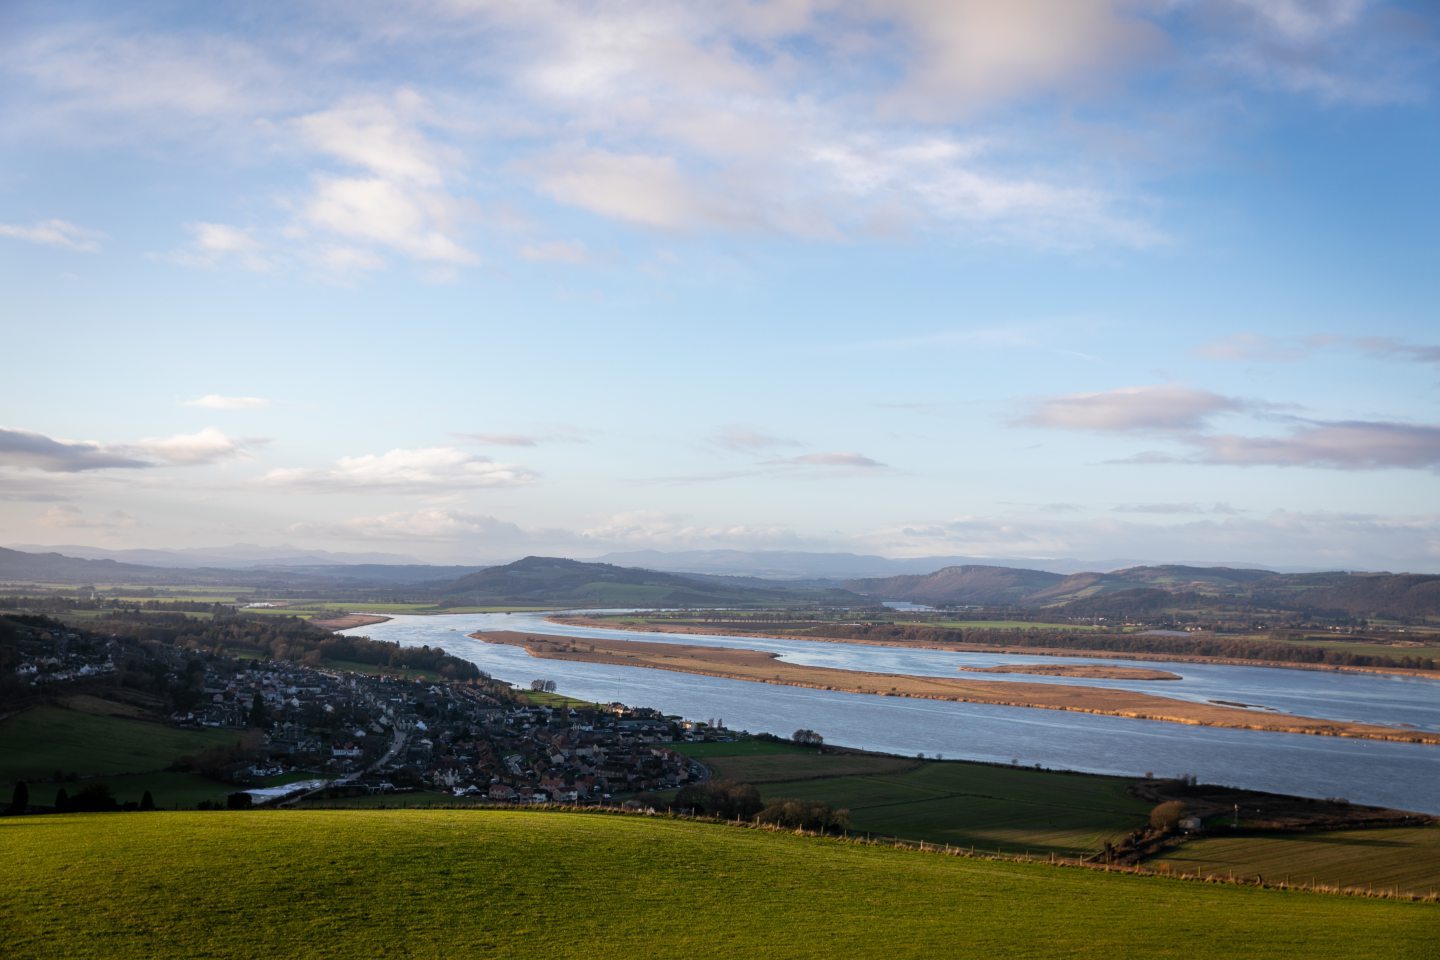 View of the River Tay from Lindores Hill looking towards Perthshire.